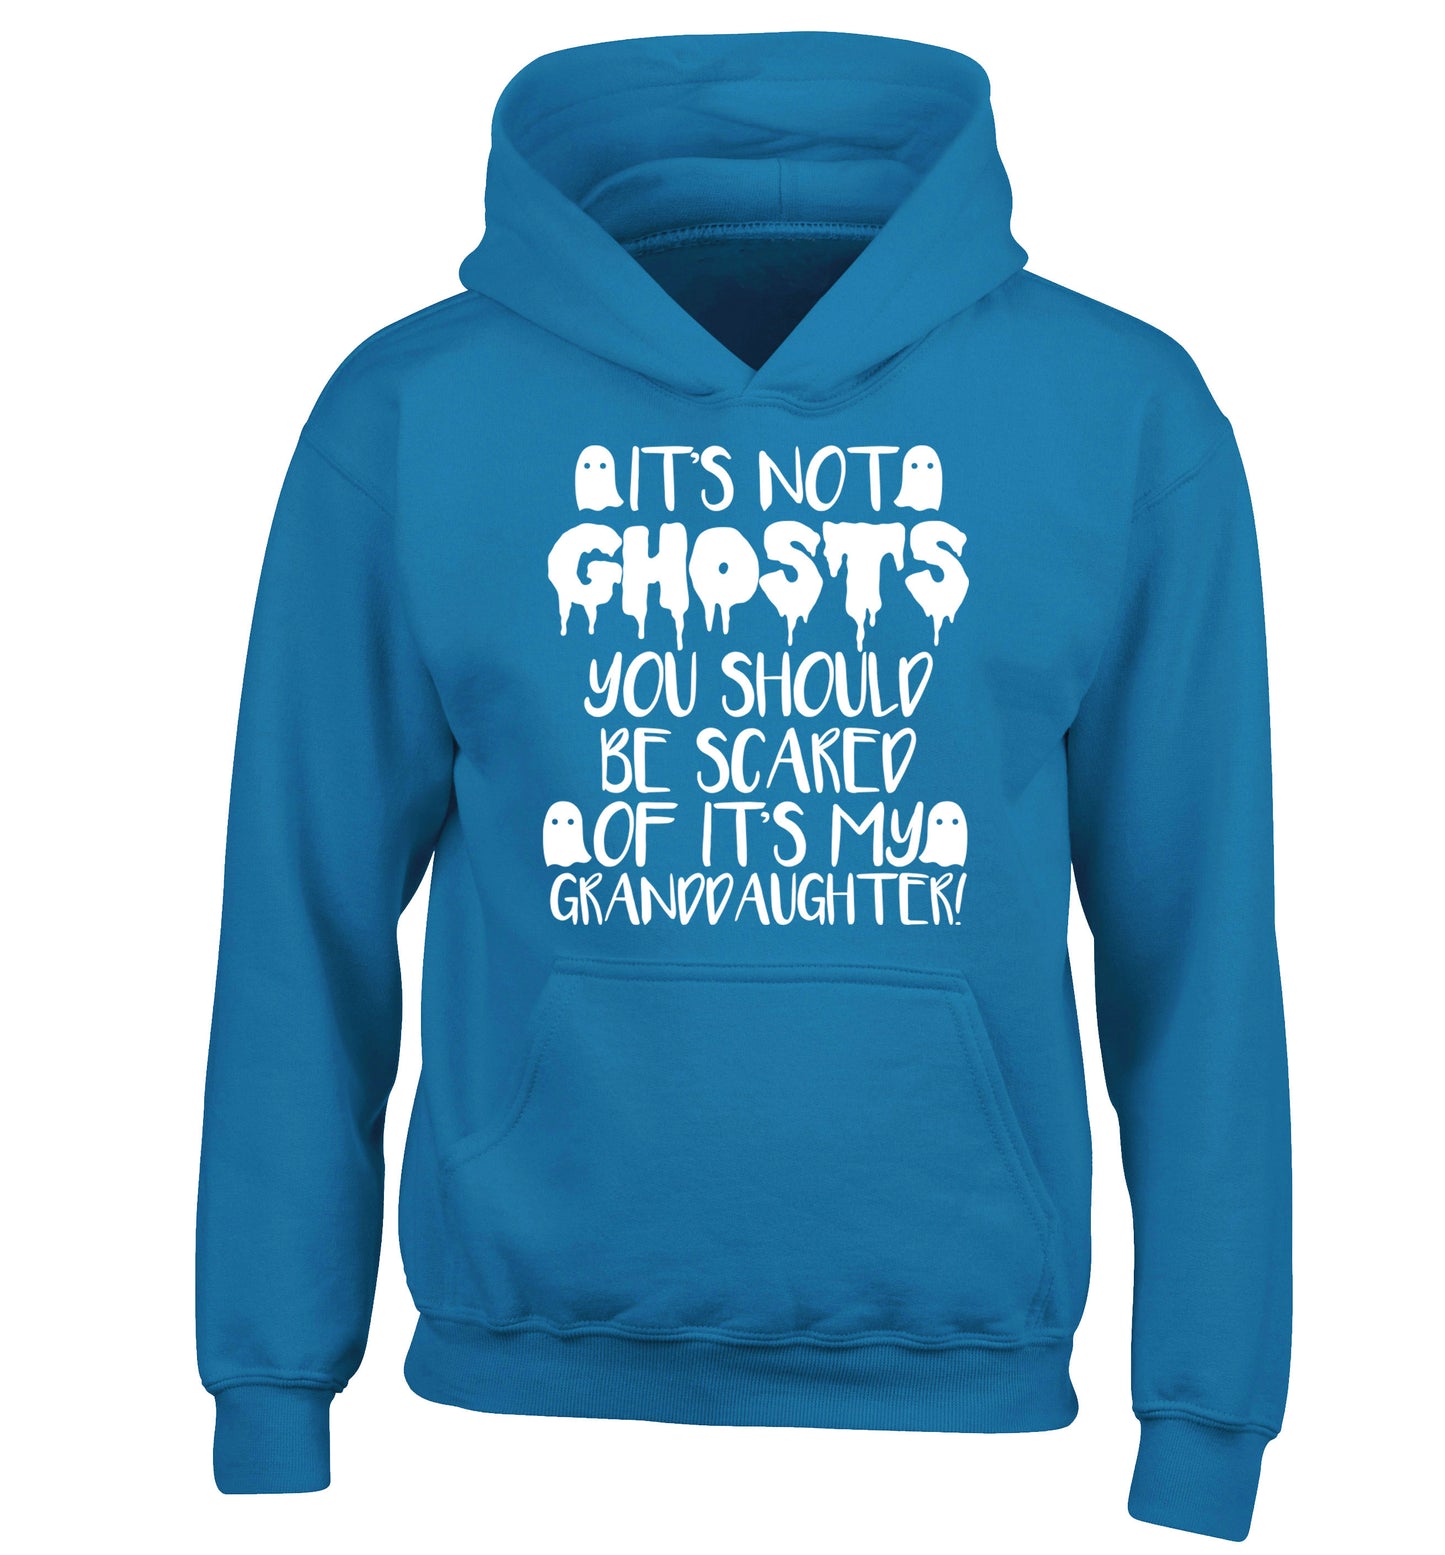 It's not ghosts you should be scared of it's my granddaughter! children's blue hoodie 12-14 Years